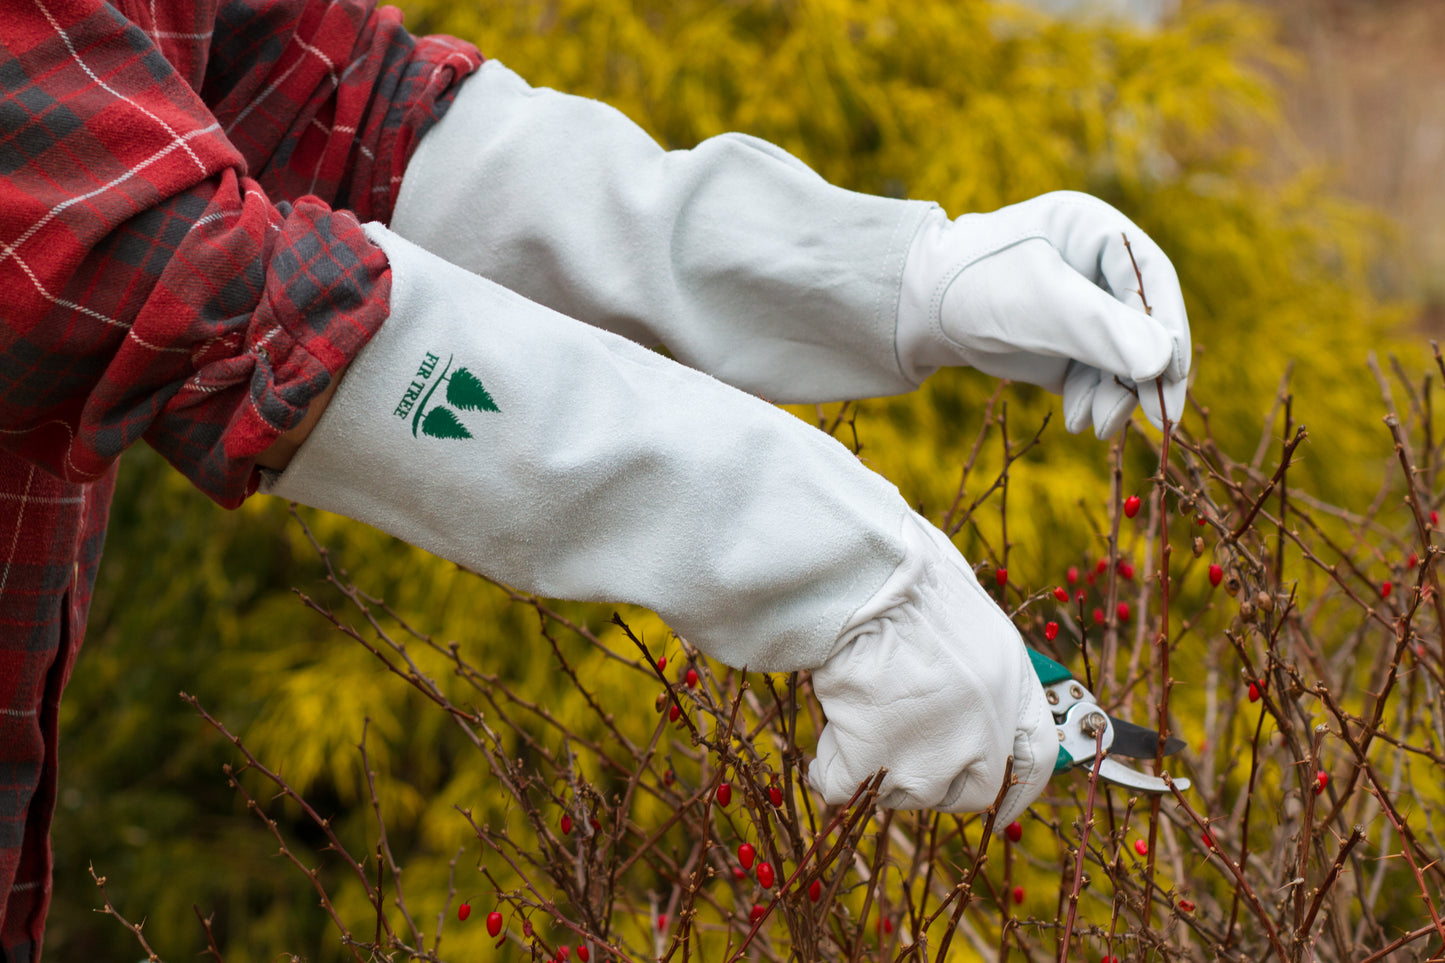 Goatskin Gardening Gloves leather is recognized as the most protective Arm and Hand Protection from Thorns